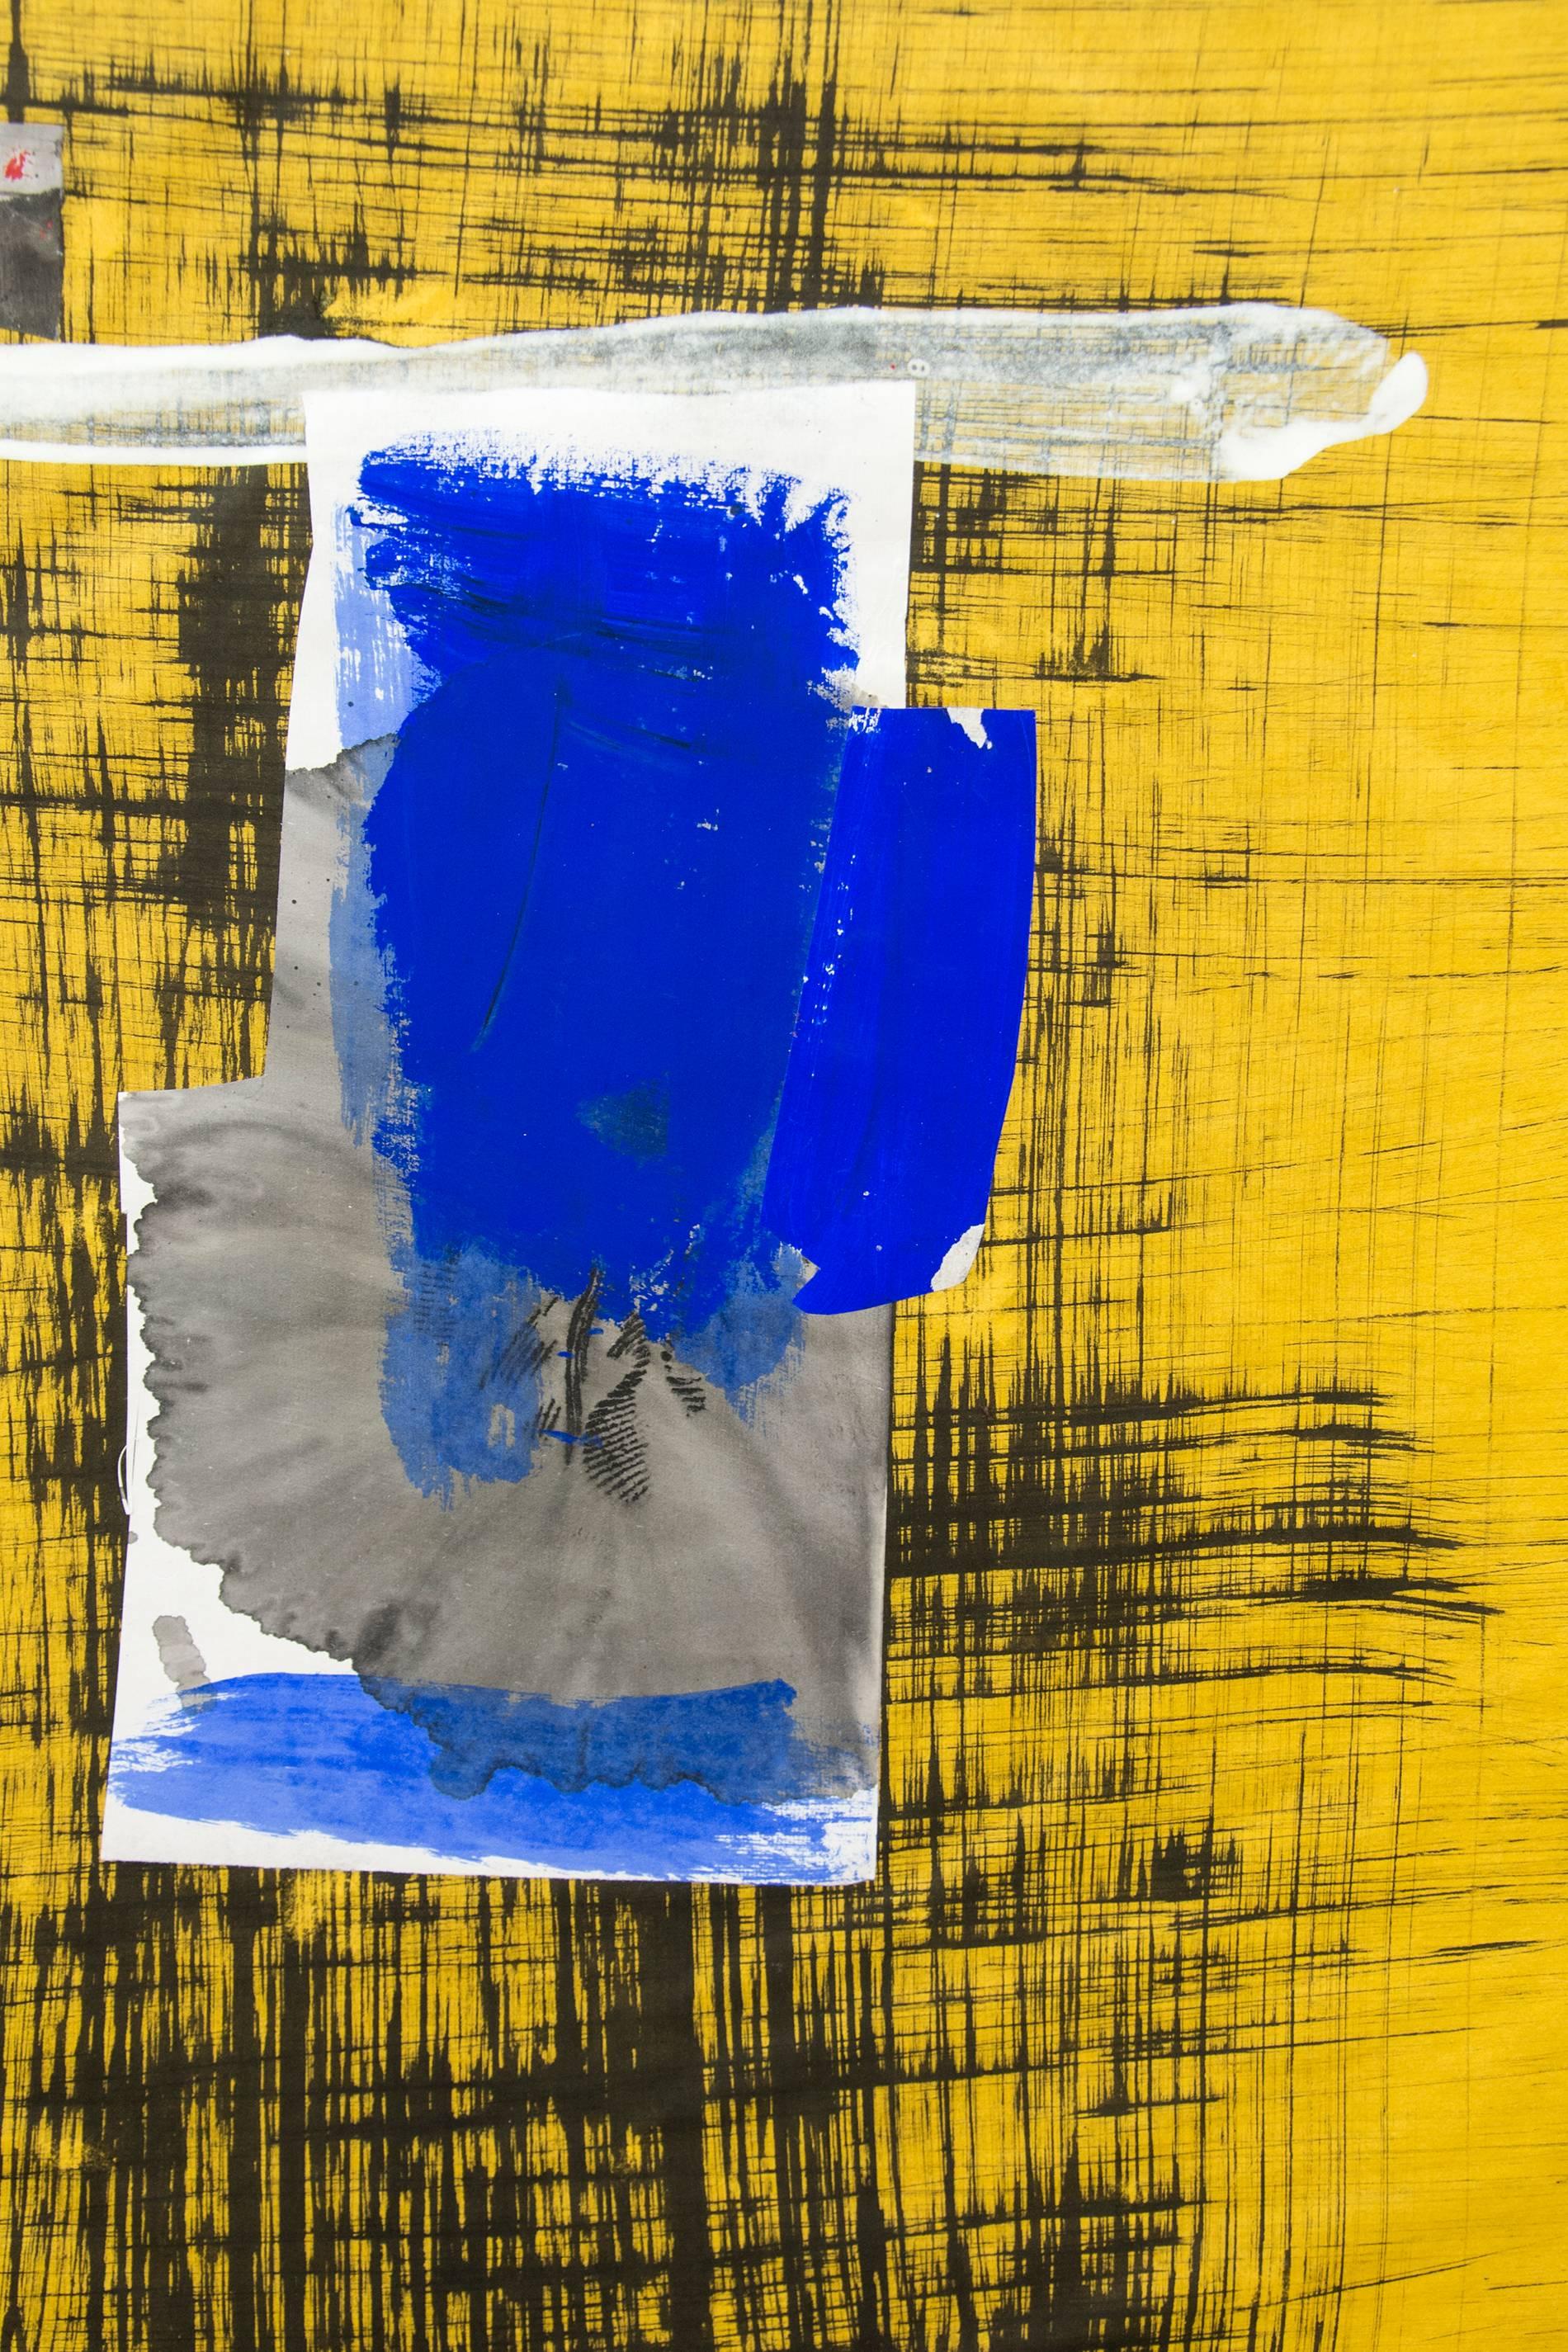 Vertical composition on paper with a canary yellow acrylic ground over which bristle brushed lines are cross hatched in black. Layered over these central marks is a central collaged strip of paper highlighted in ultra marine blue and grey topped by